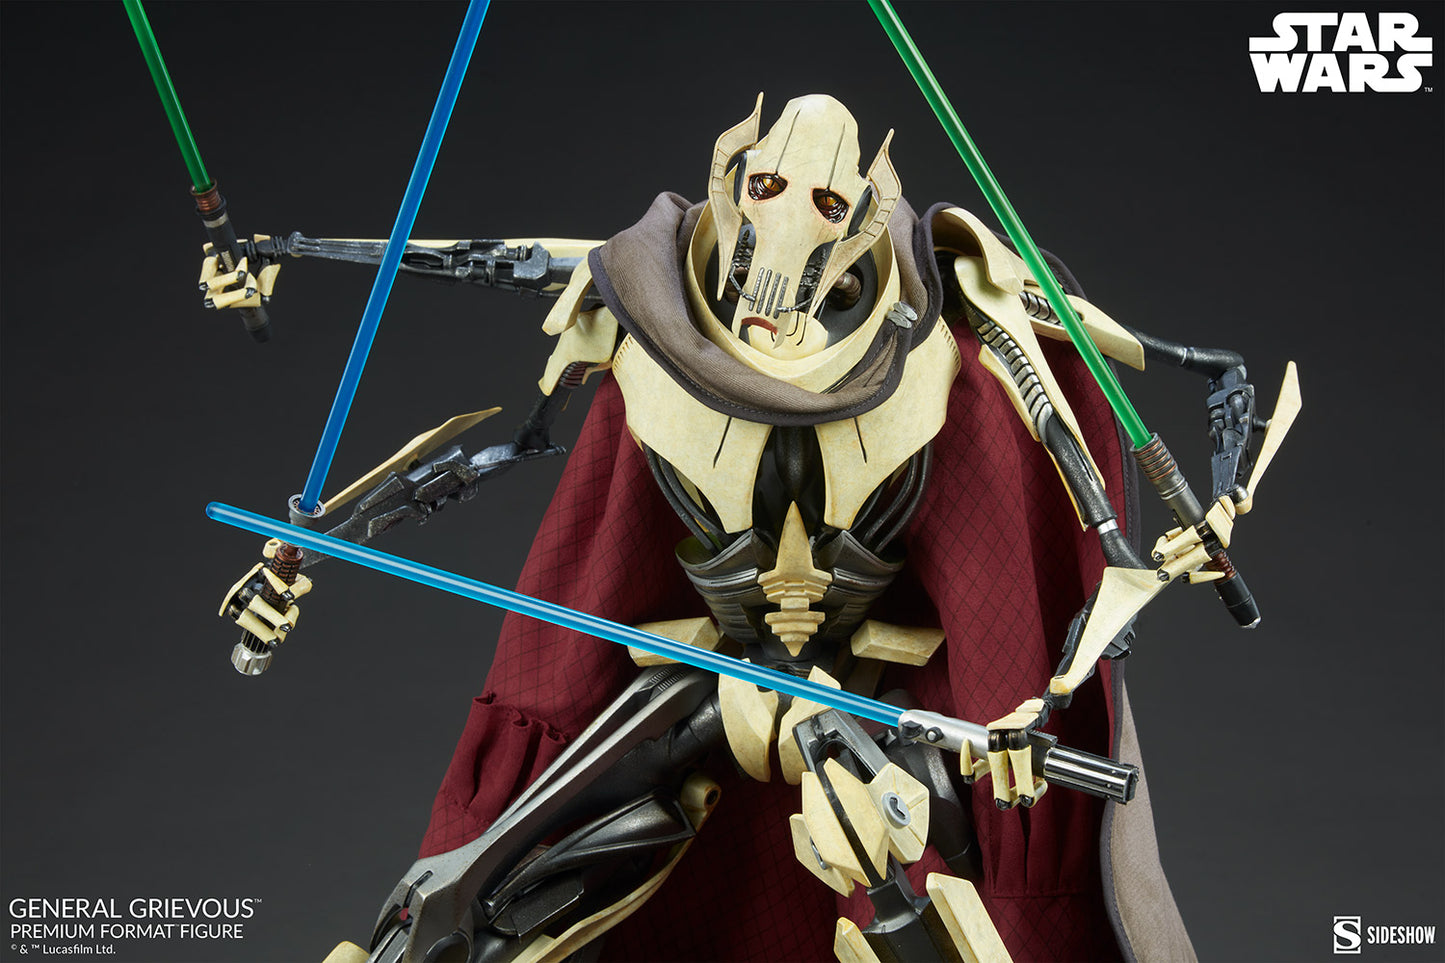 Load image into Gallery viewer, General Grievous (Star Wars: The Clone Wars) Premium Format Statue by Sideshow
